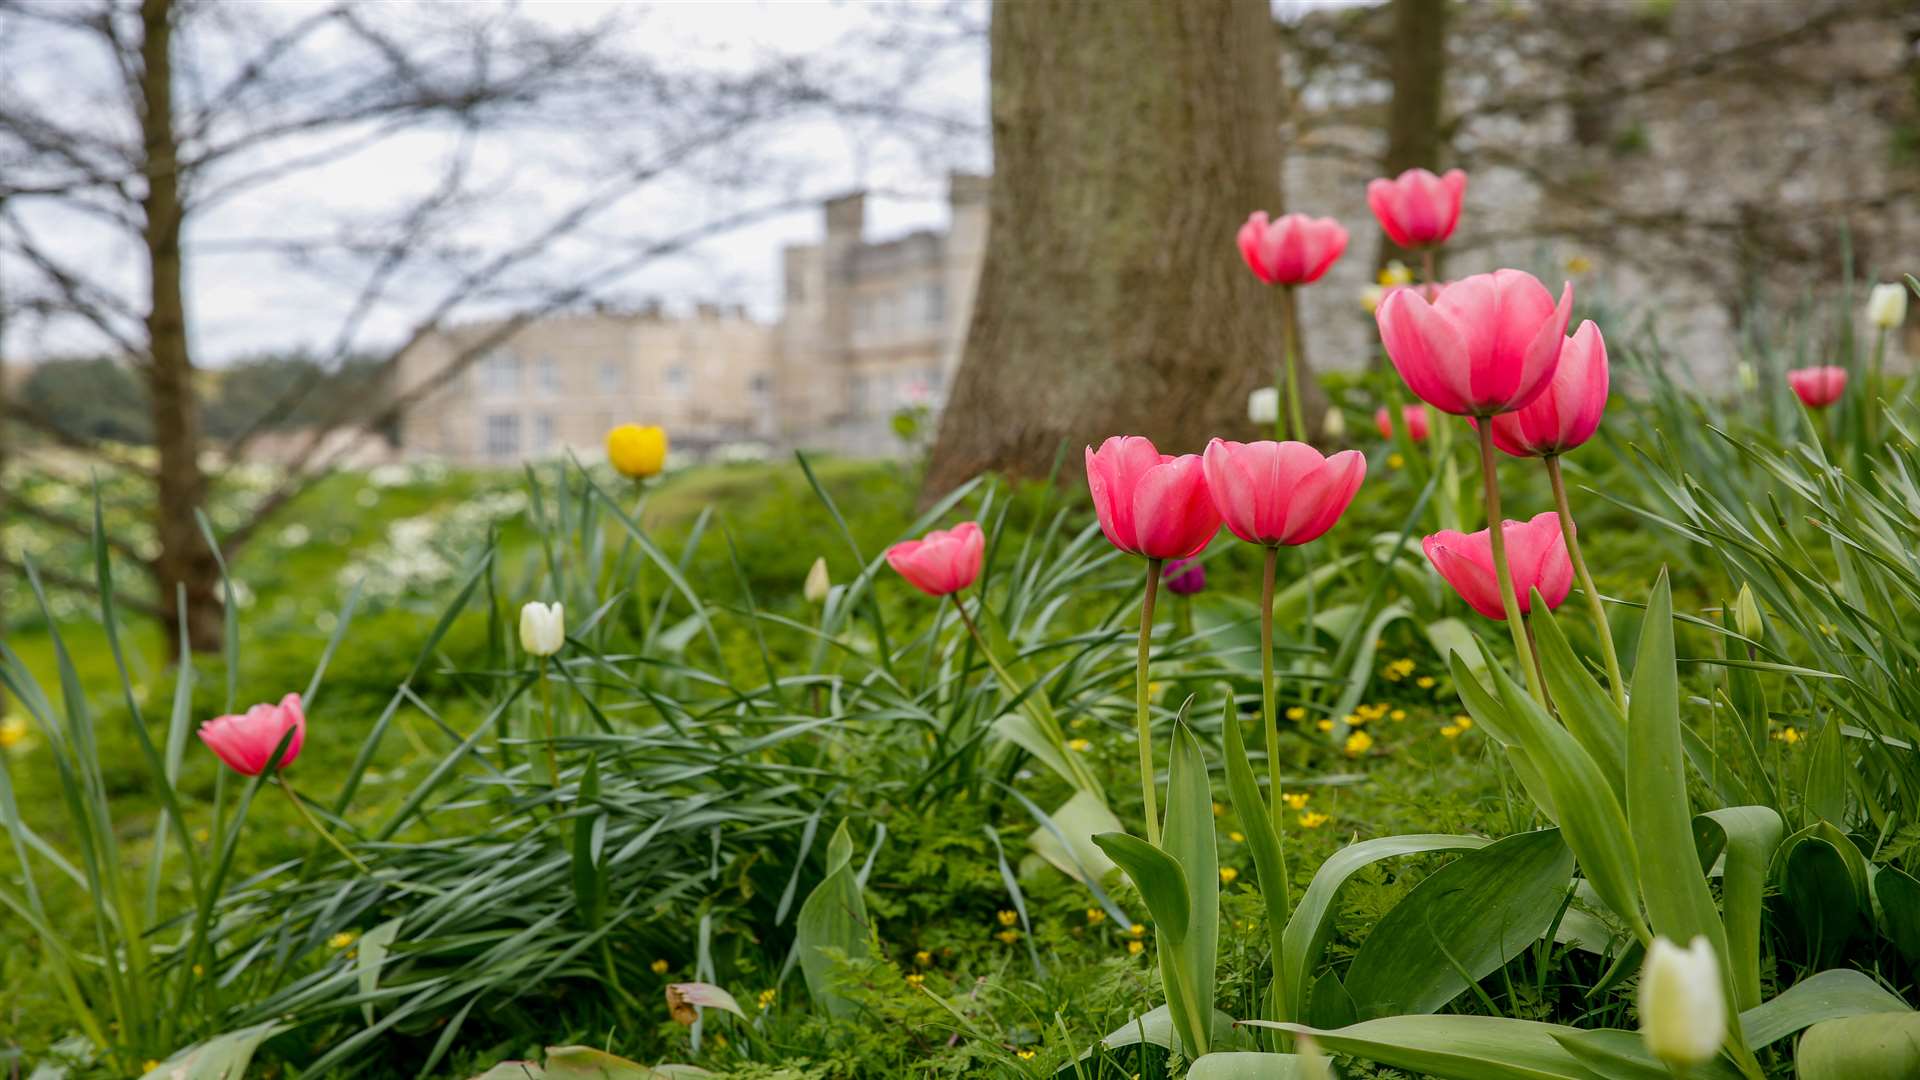 The gardens at Leeds Castle are open all year round